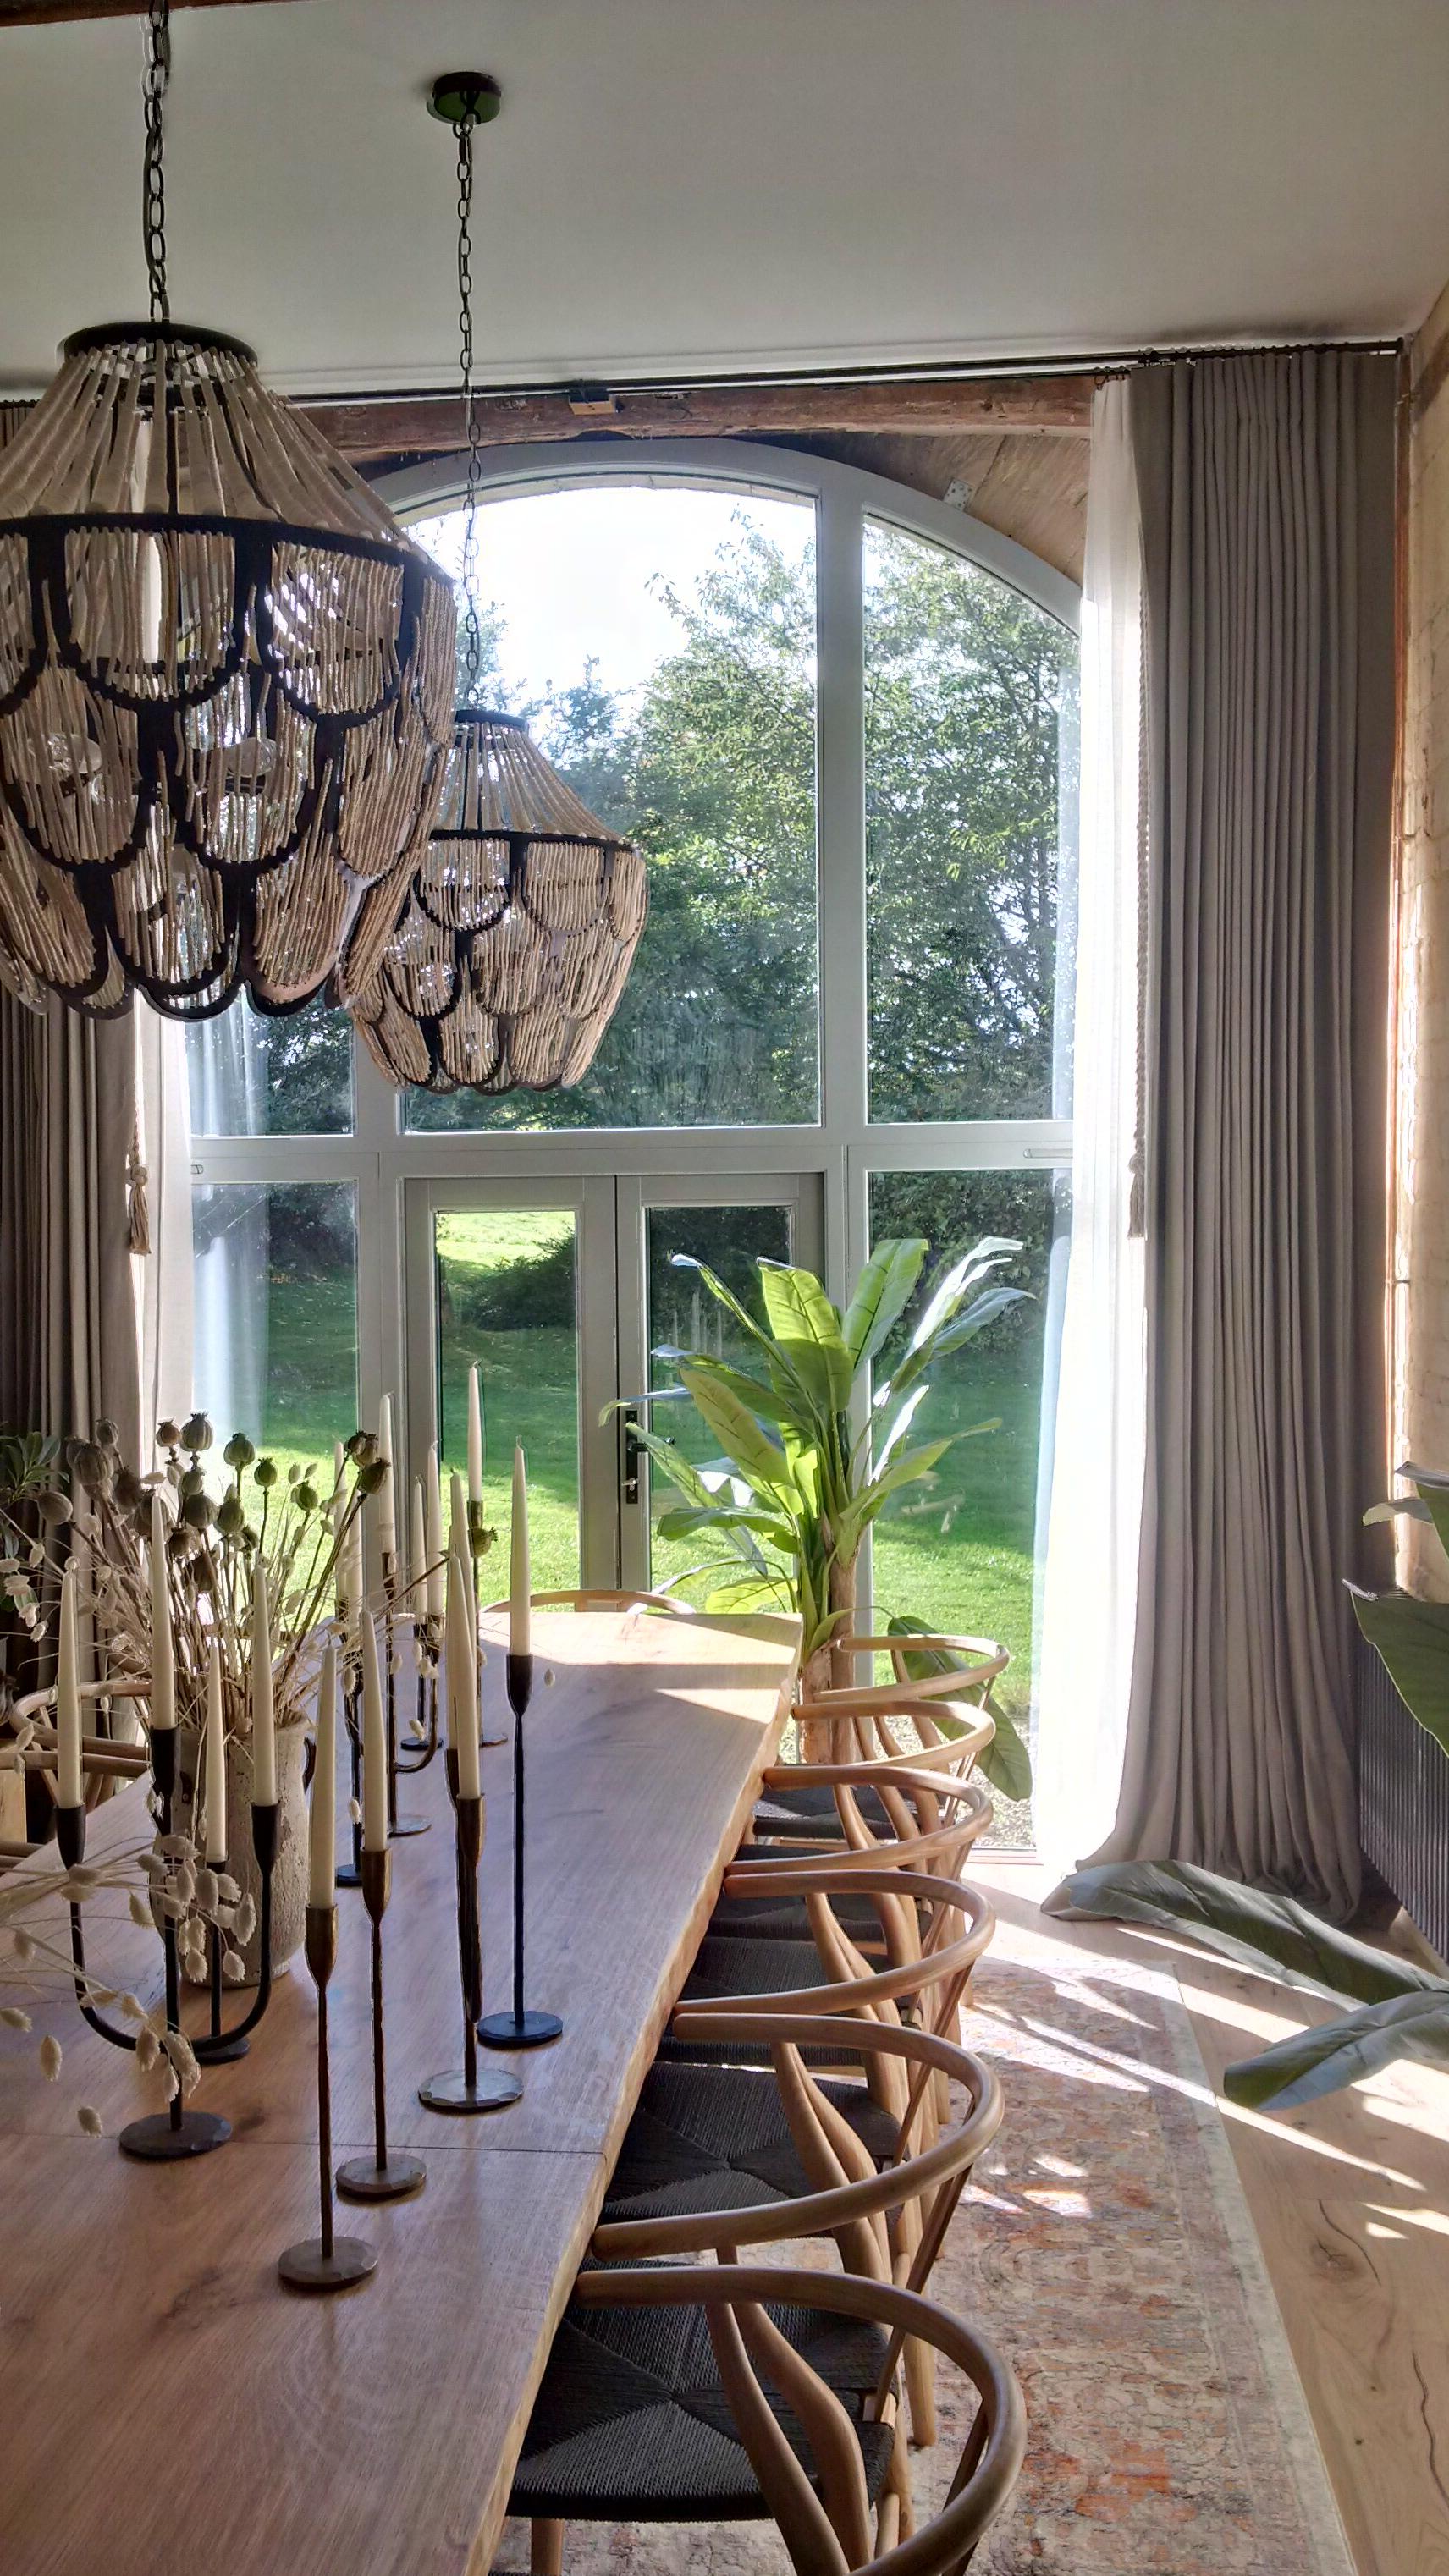 Cheltenham - Double curtain pole with 4m long inverted pleat curtains and sheers, with rope pulls.